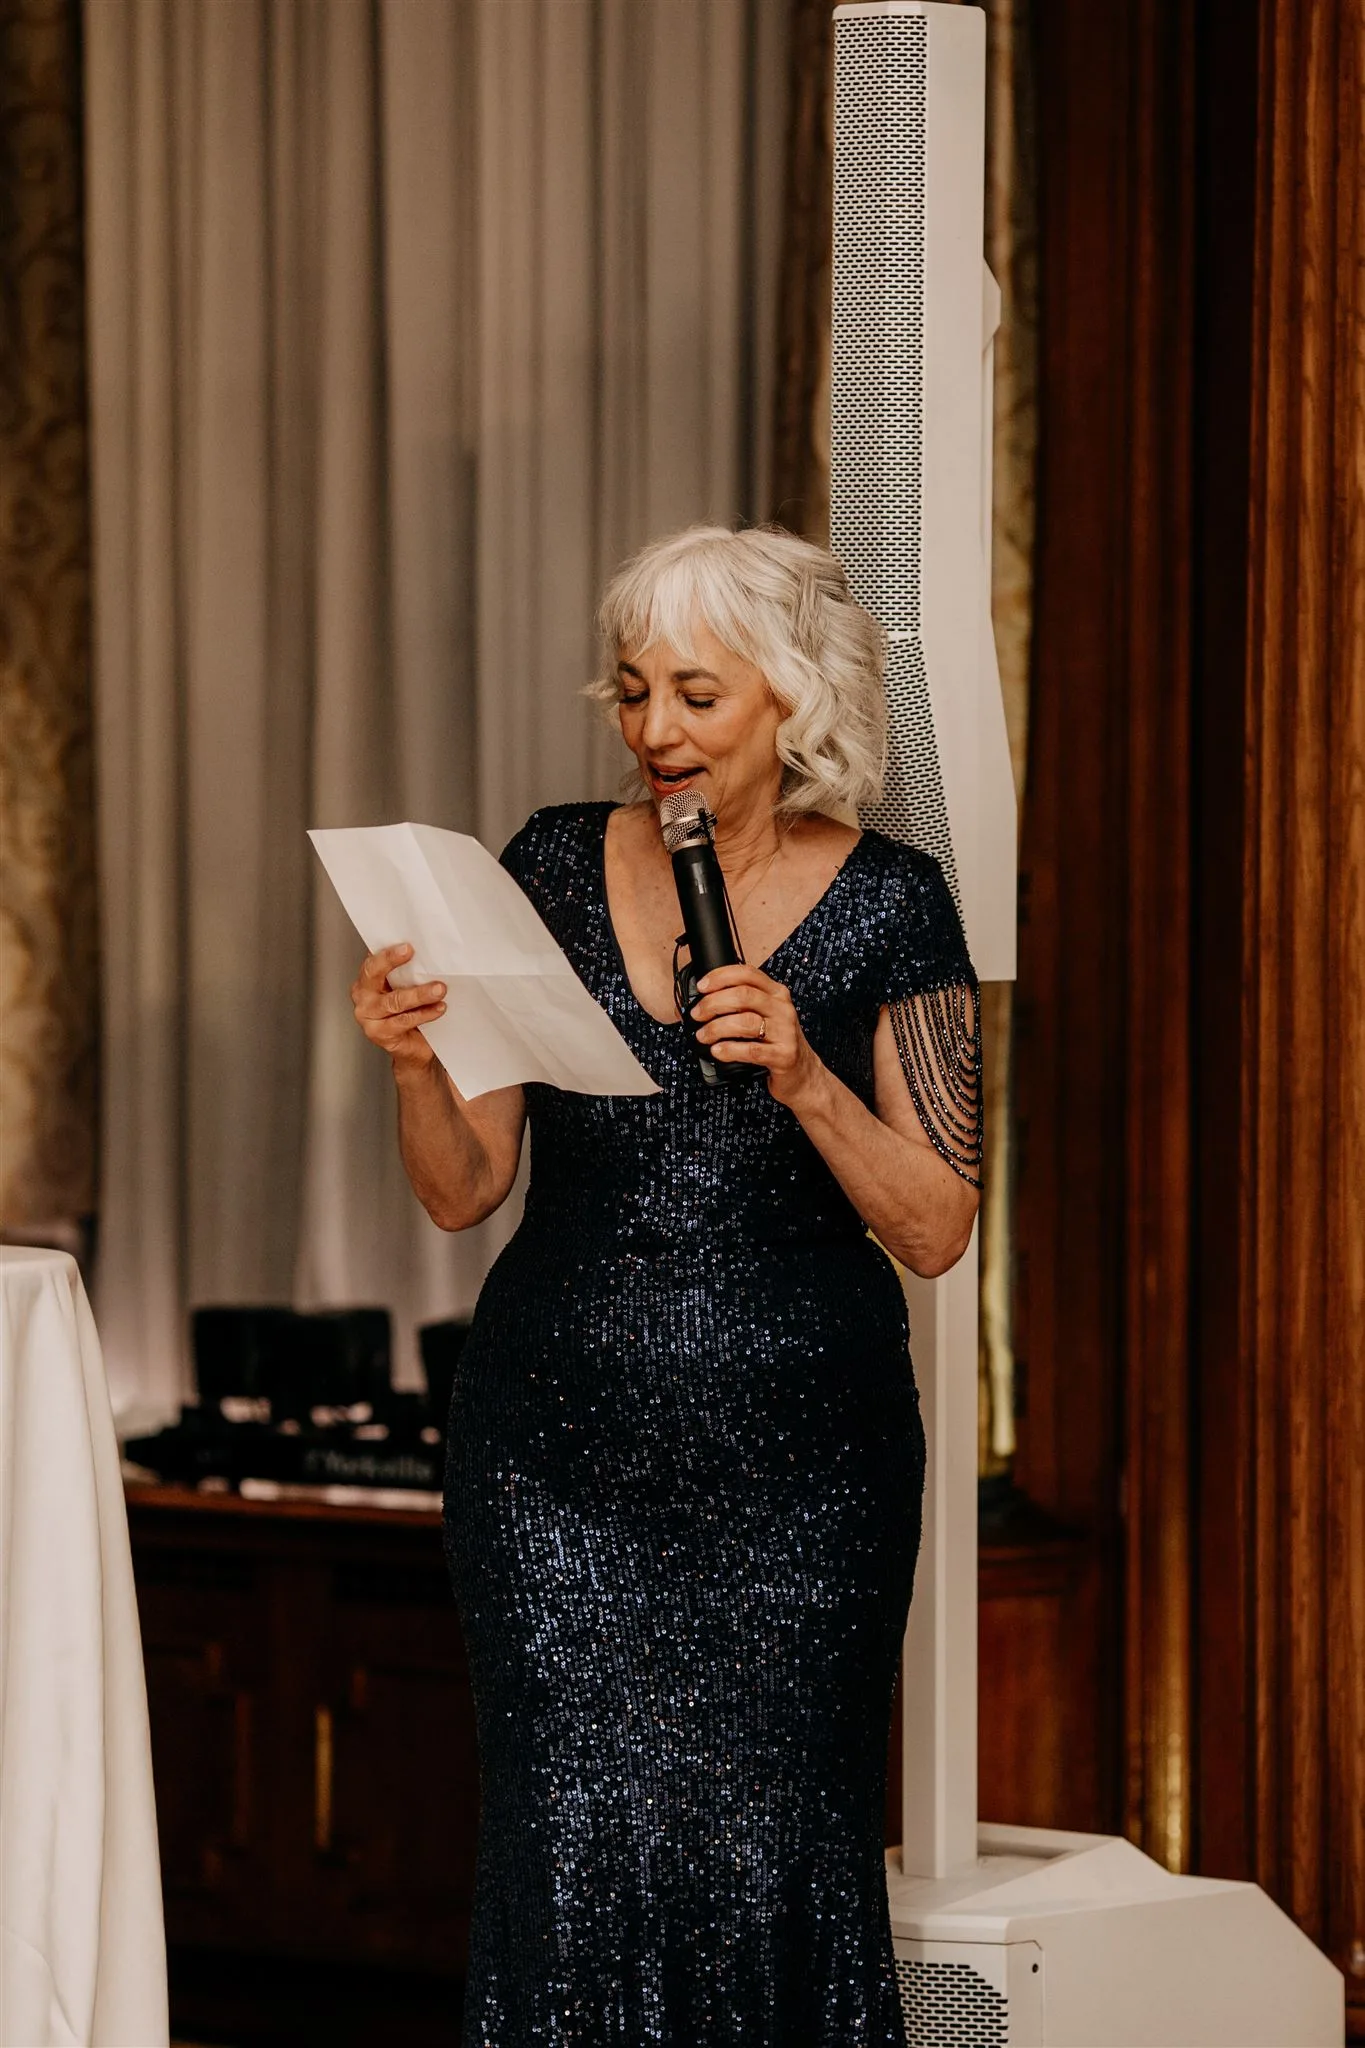 Mother of the bride wedding speech, mom holding mic and piece of paper in blue dress